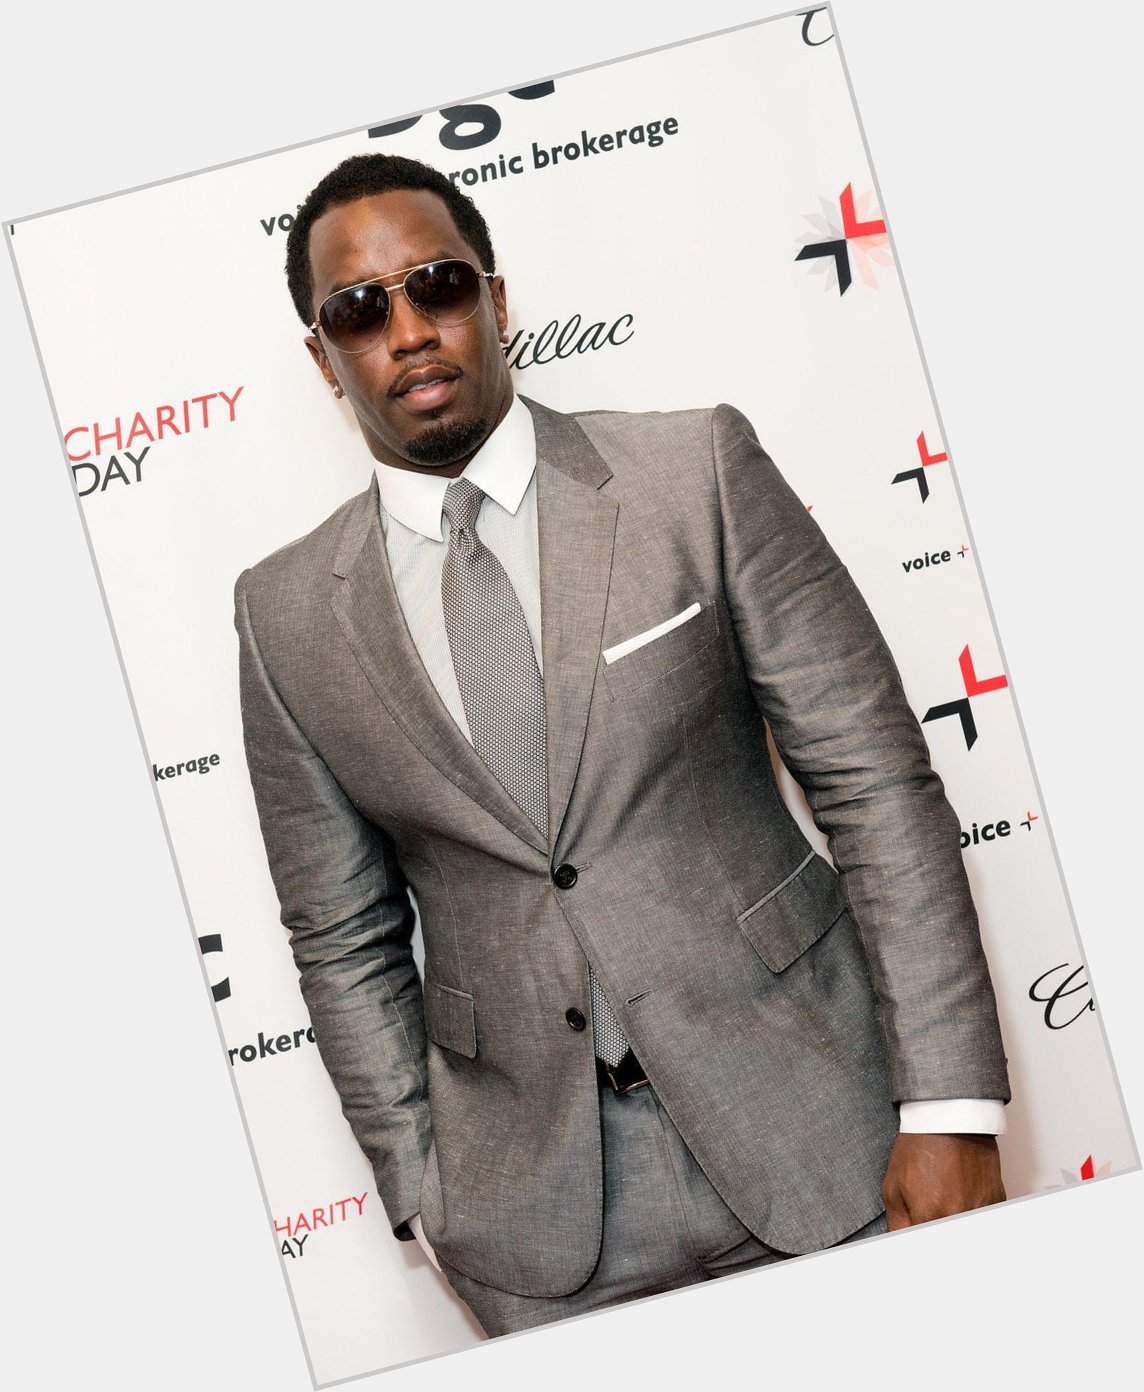 HAPPY BIRTHDAY: is celebrating today! Whats your favorite Sean Diddy Combs movie?  